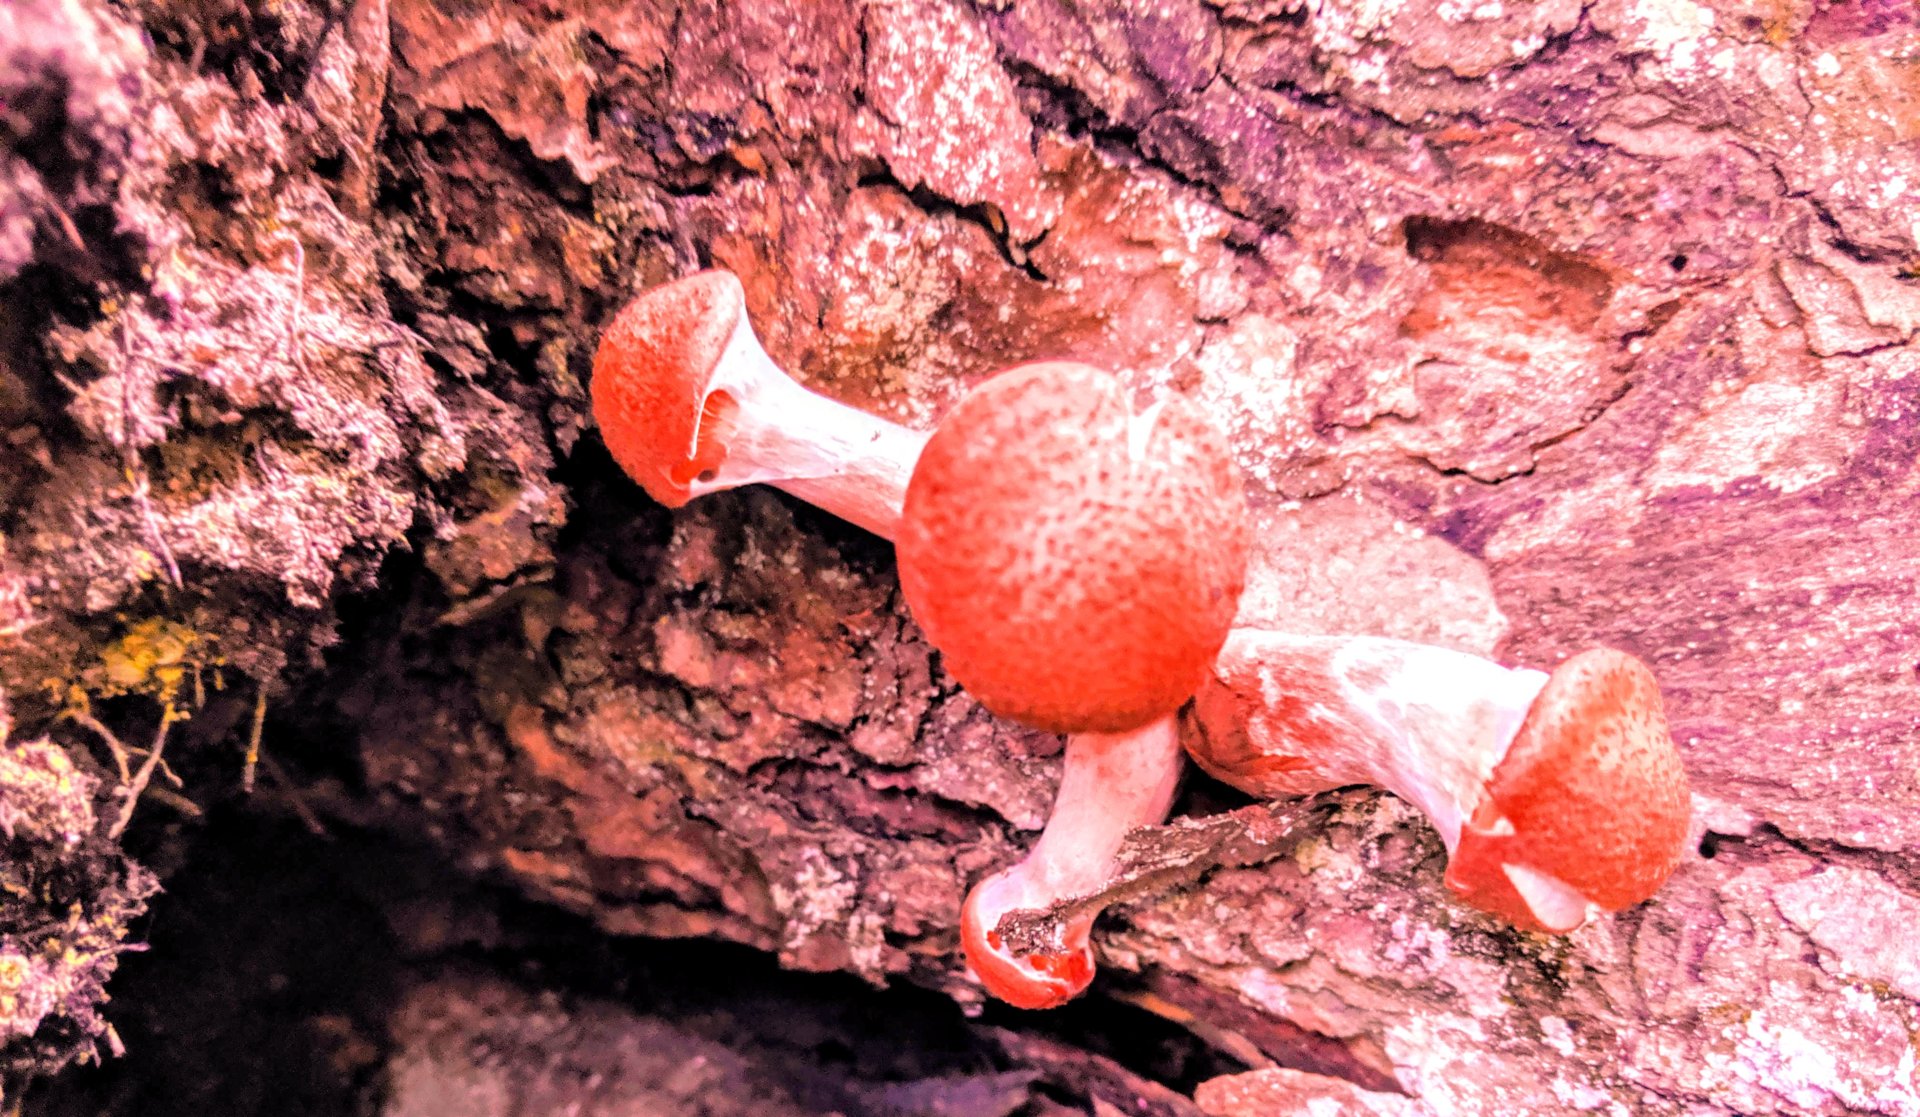 Closer look at three red cap mushrooms, growing out of the side of a log in Downeast, Maine. 2019